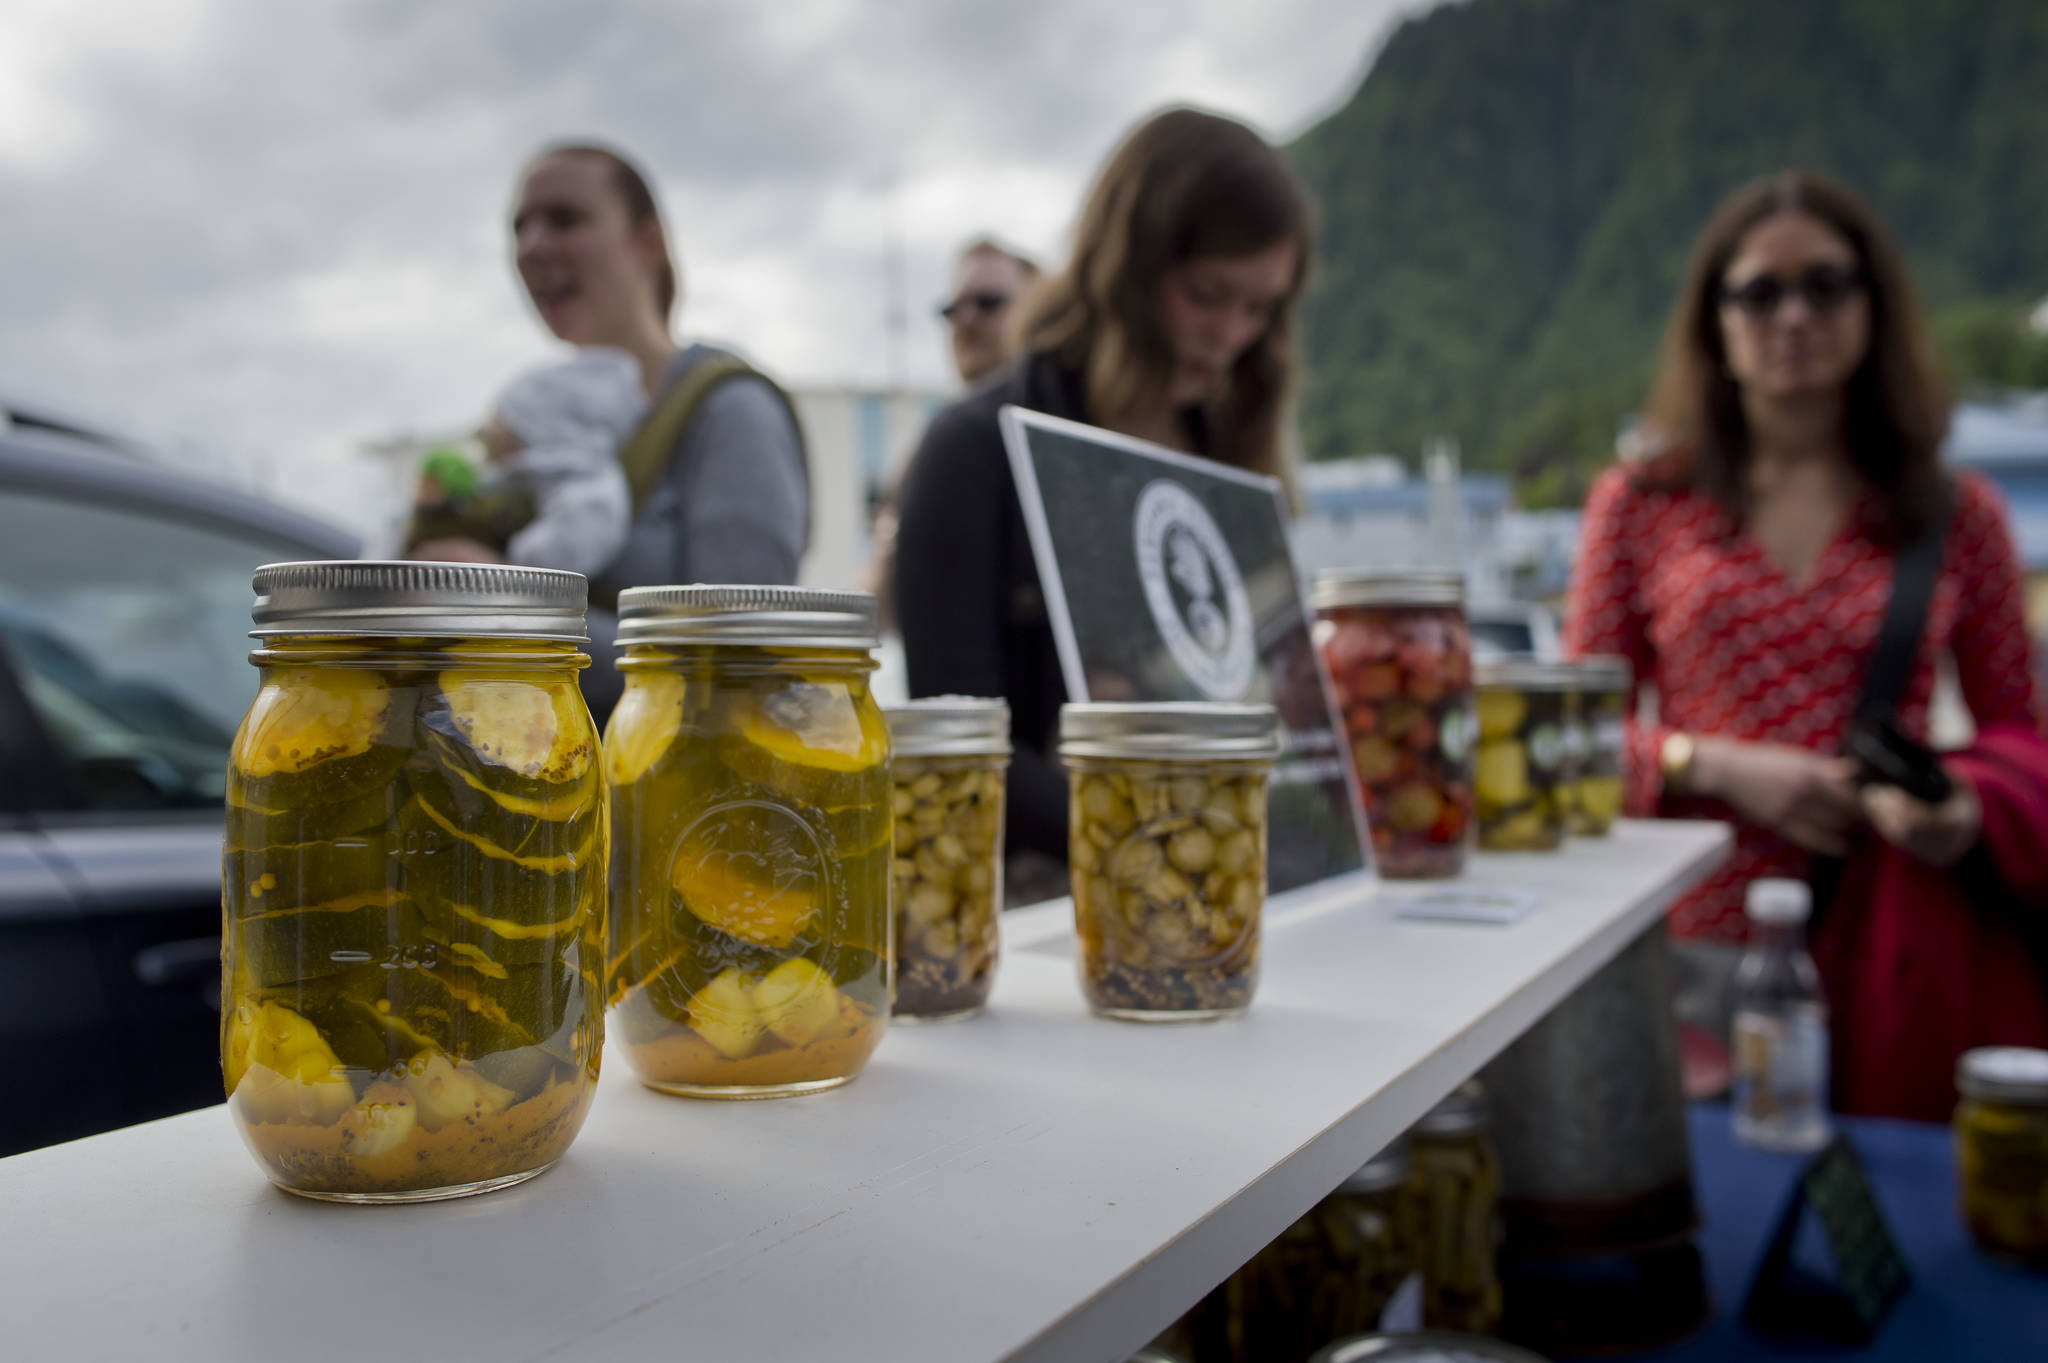 Kylie Wray, of Panhandle Produce, center, sells pickled vegetables during the Block Party at the Juneau Arts & Culture Center on Friday, June 15, 2018. (Michael Penn | Juneau Empire)